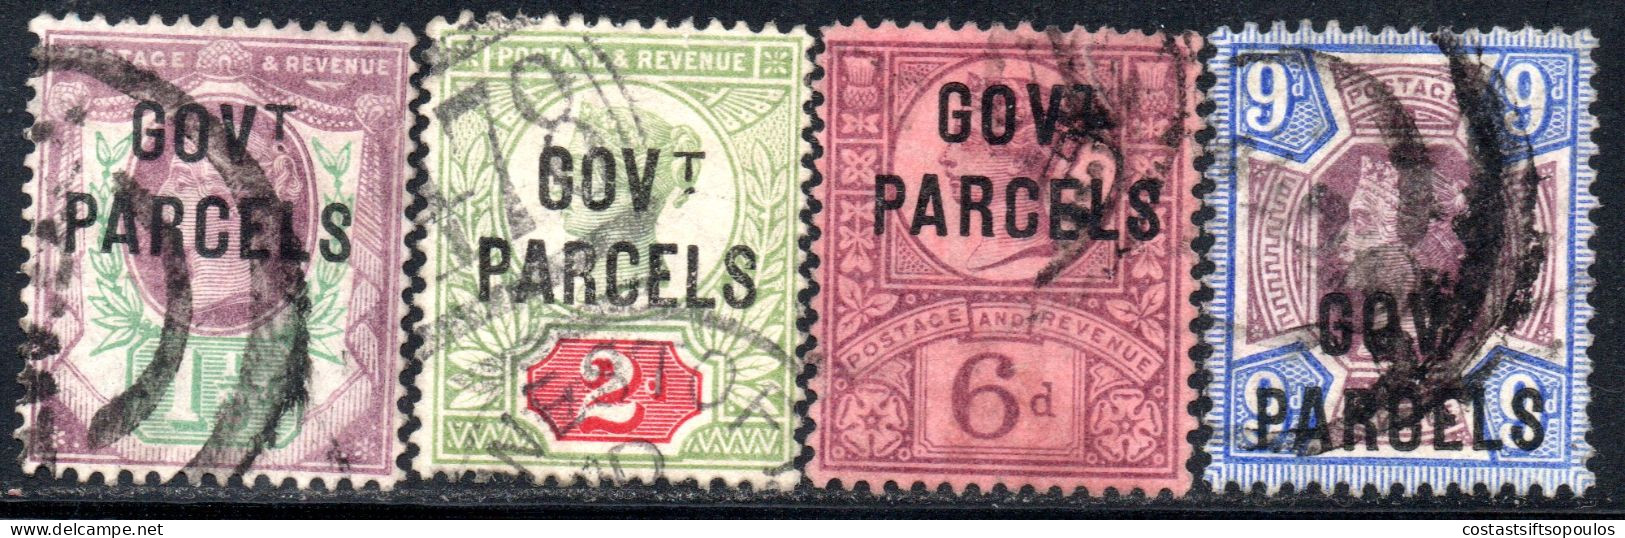 3075. 1887-1900 4 GOVERNMENT PARCELS STAMPS LOT. - Service